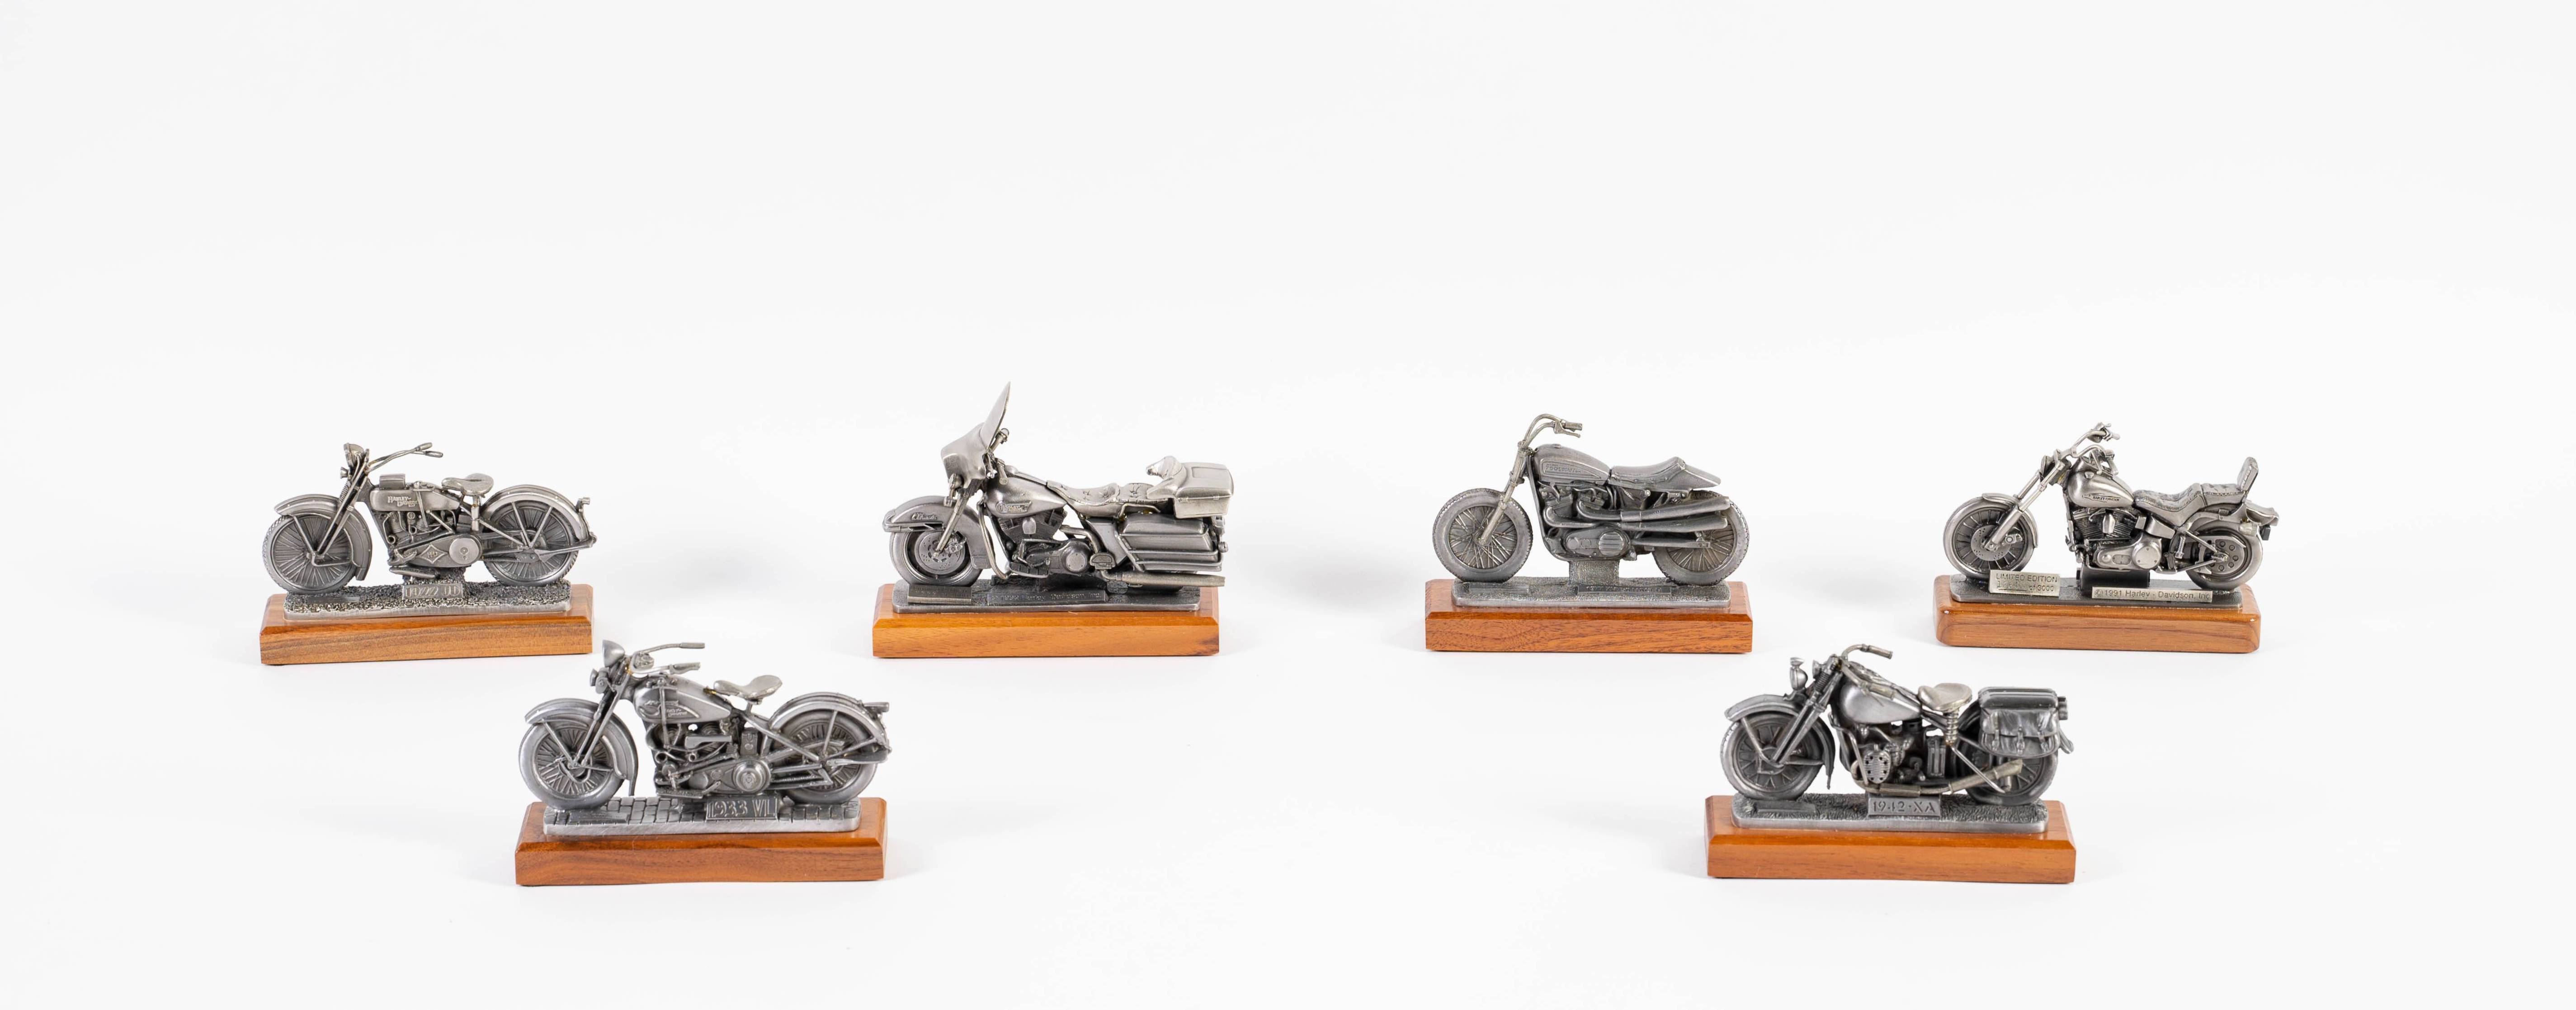 Replicas　Time　Mecum　Traveling　Harley-Davidson　Wood　Auction　Base　Museum　with　Pewter　On